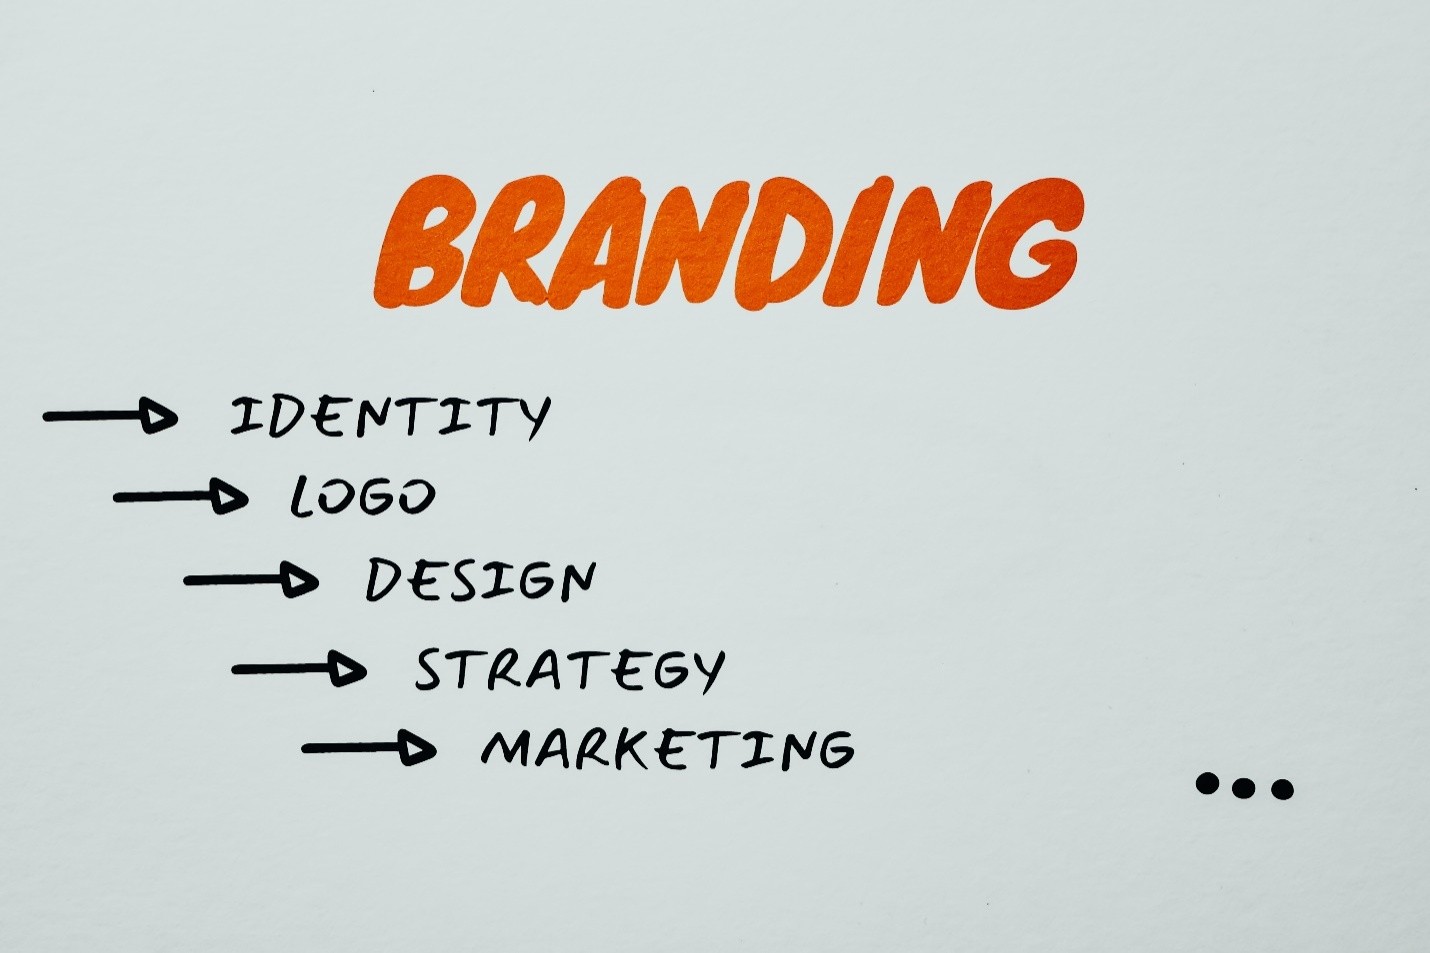 A picture displaying the process of branding